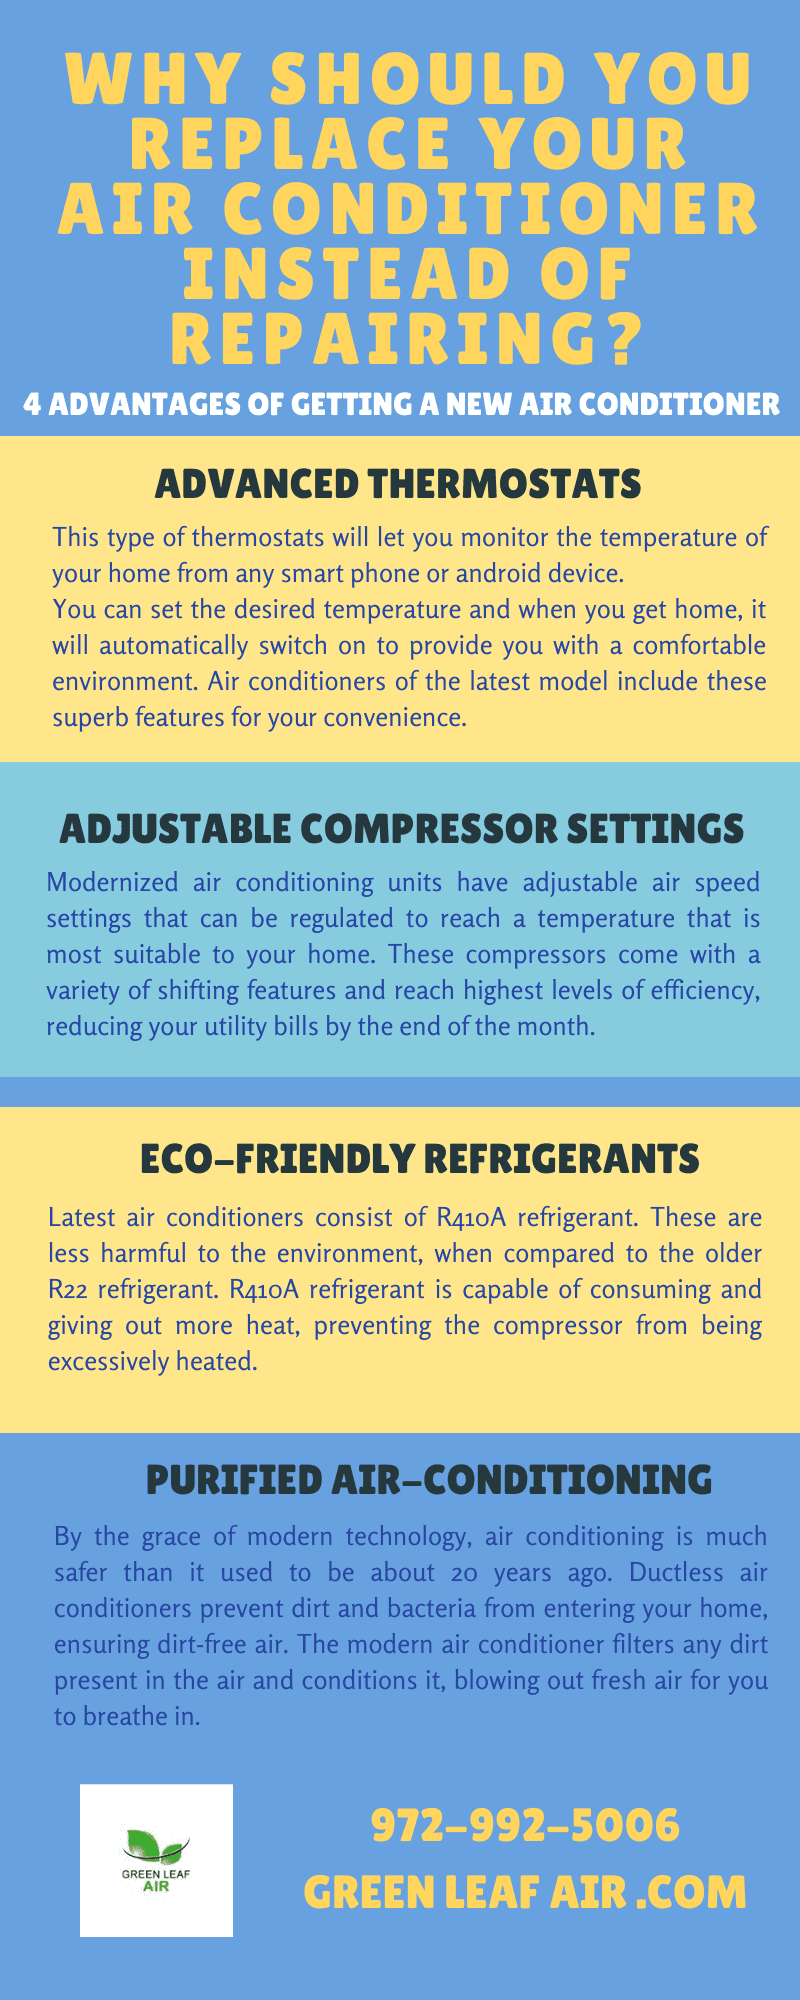 Why Should You Replace Your Air Conditioner Instead Of Repairing